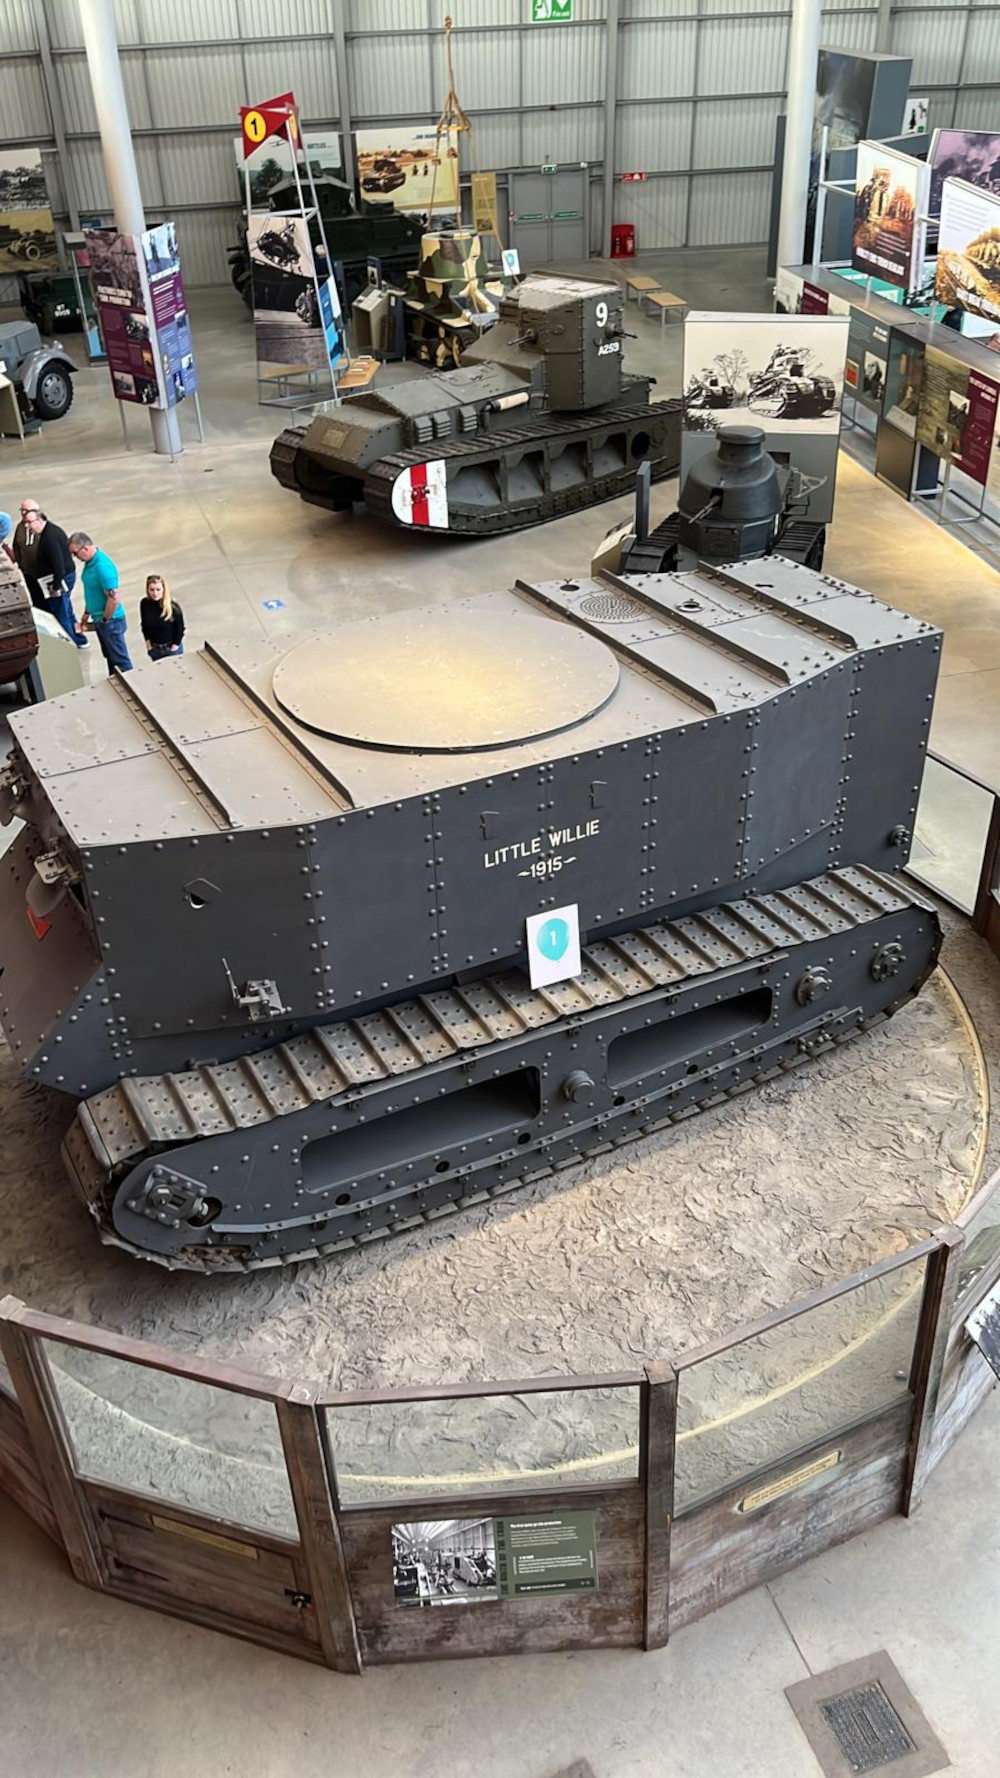 Little Willie, the first tank designed, at Bovington Tank Museum